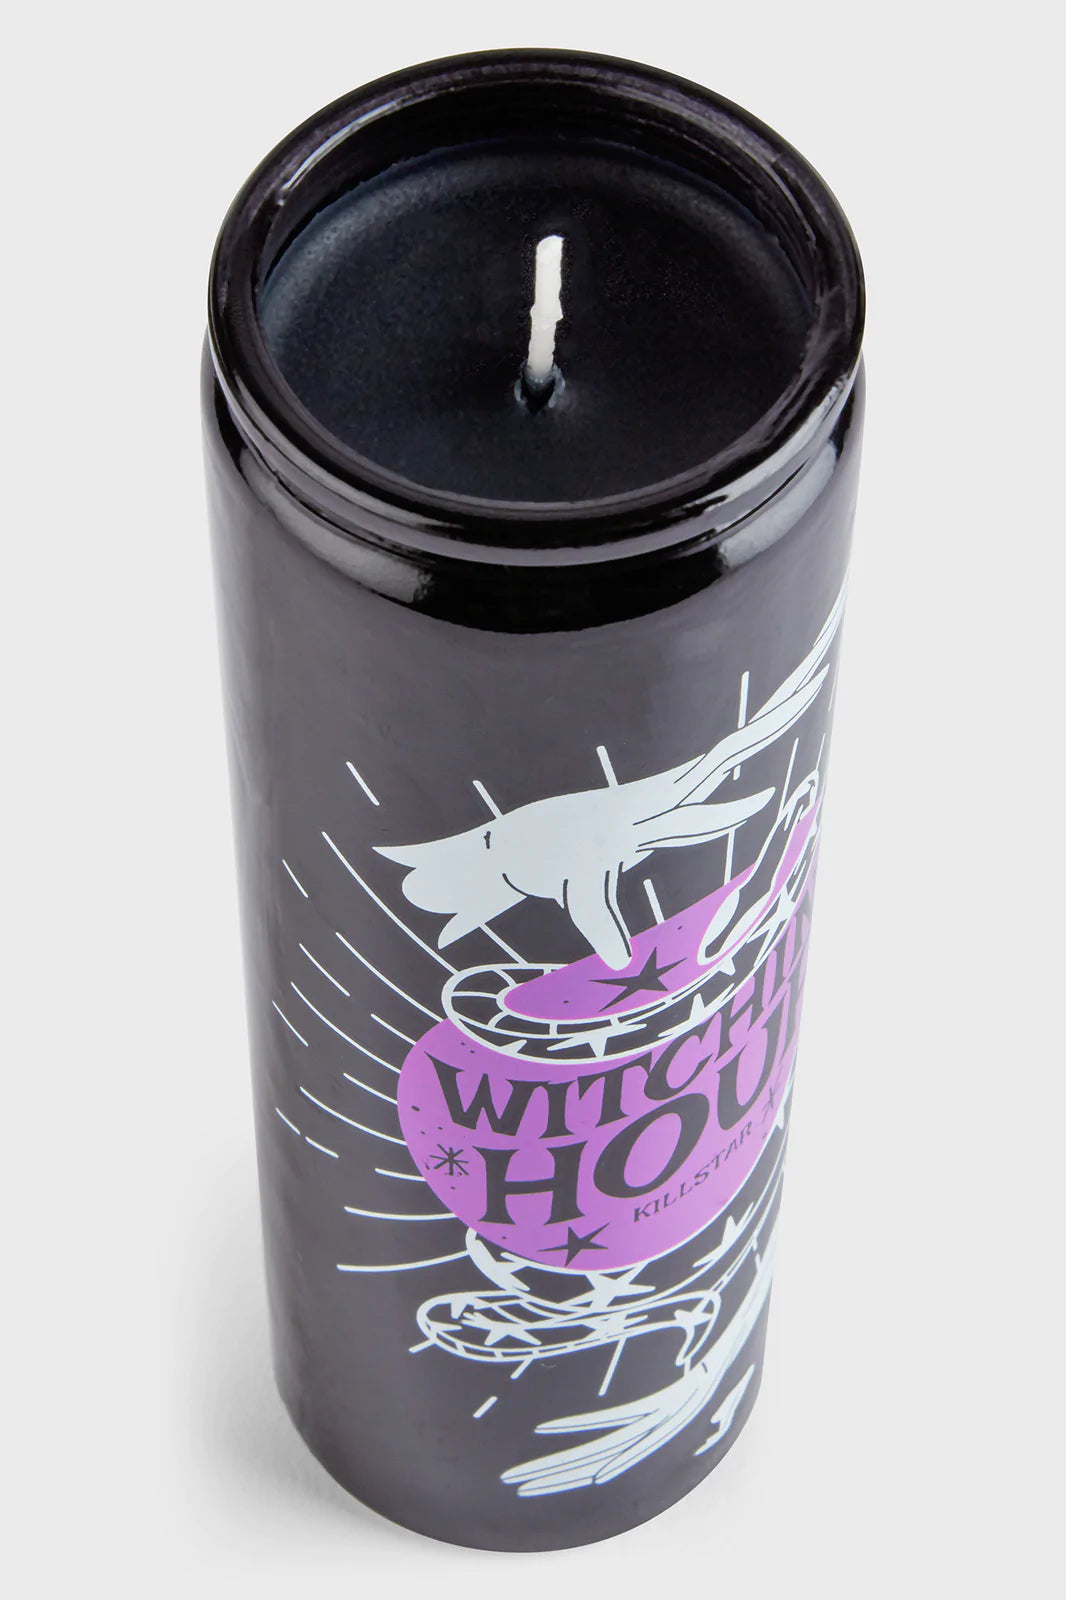 Killstar Witching Hour Candle - Kate's Clothing